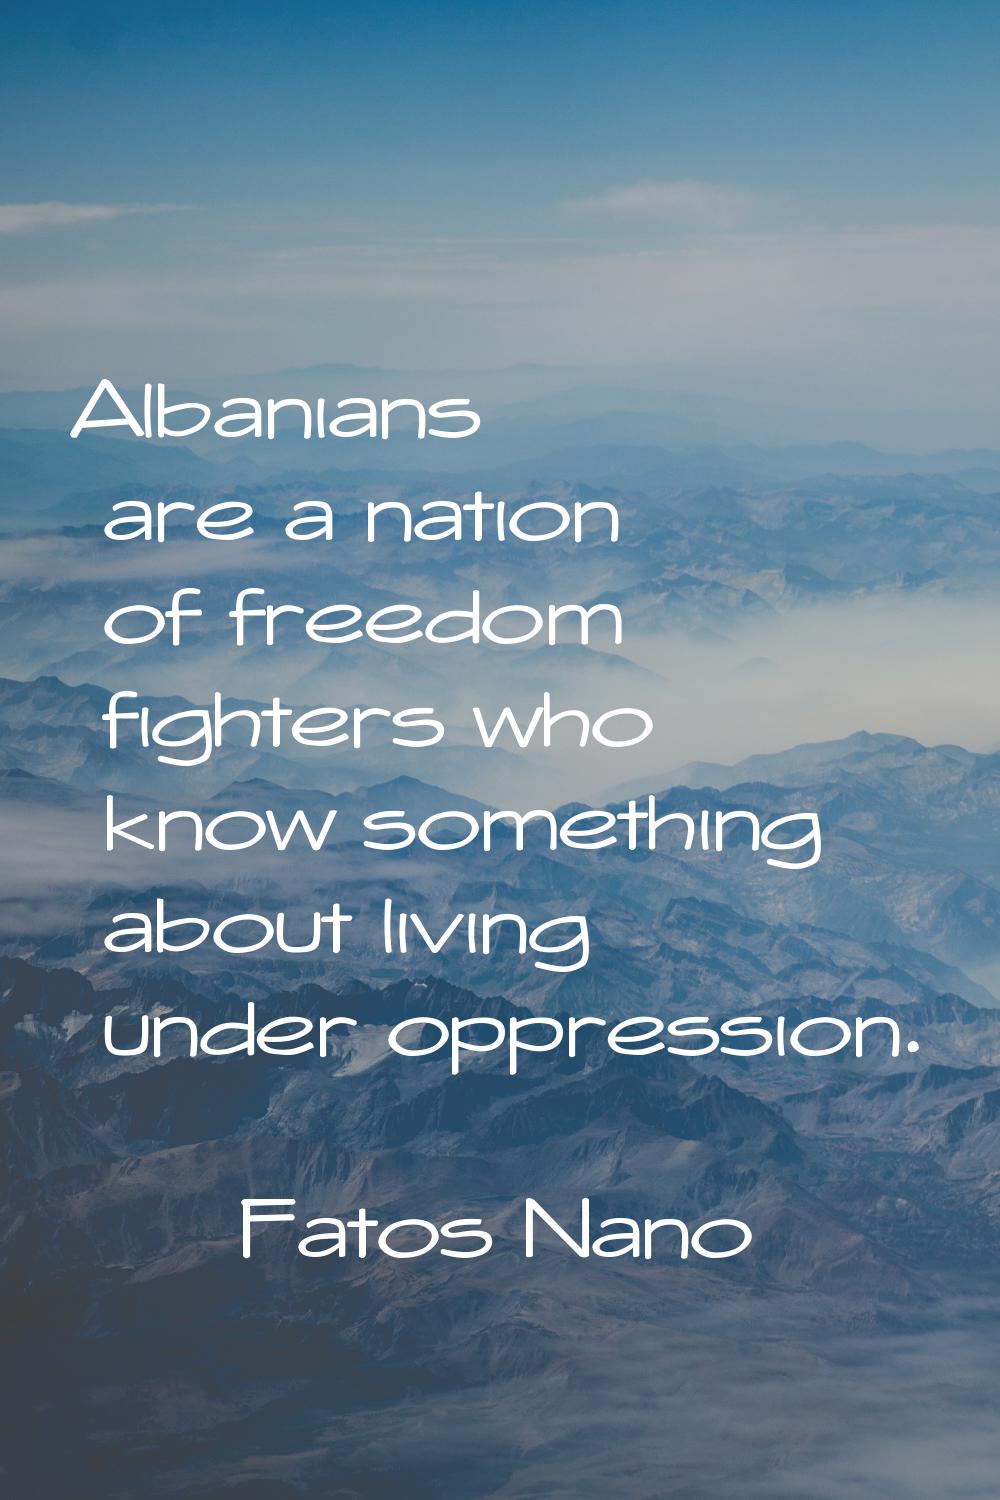 Albanians are a nation of freedom fighters who know something about living under oppression.